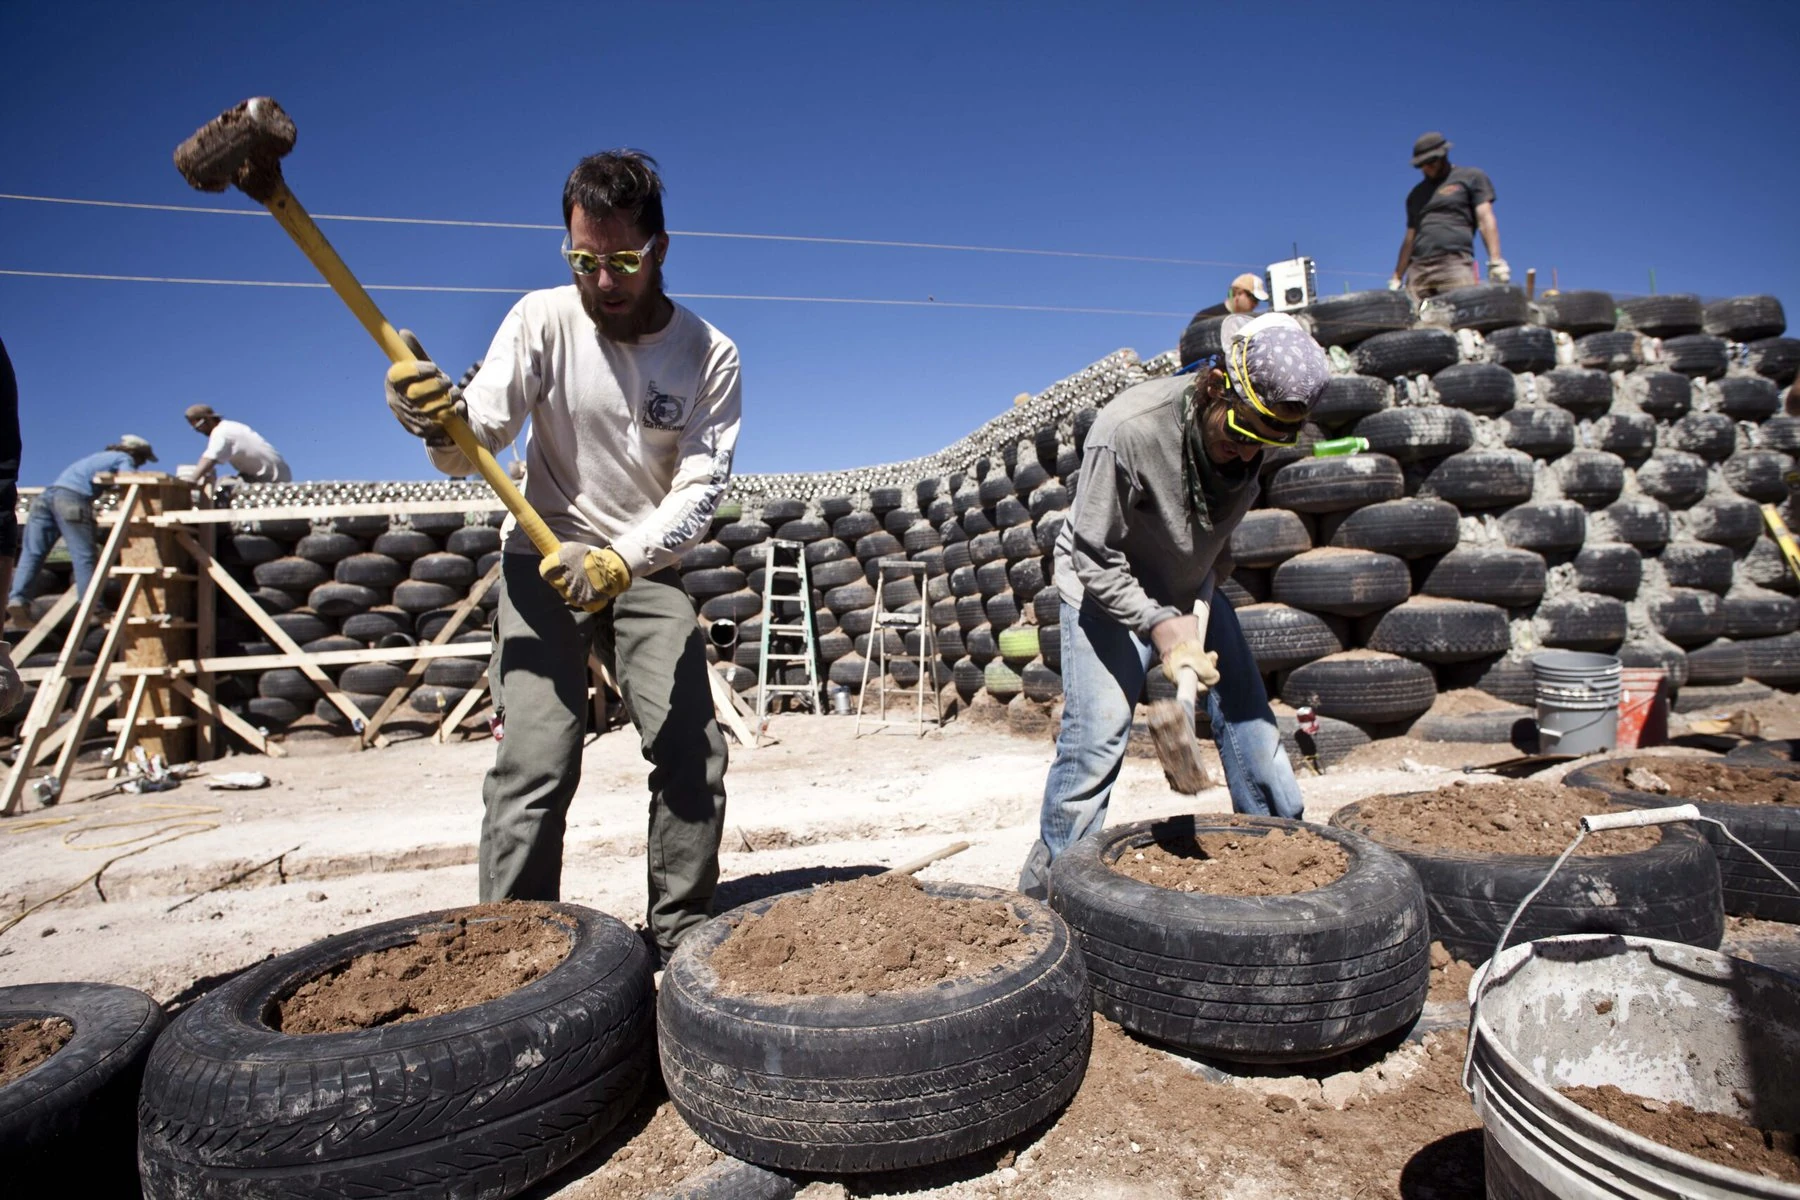 Earthship construction with tires